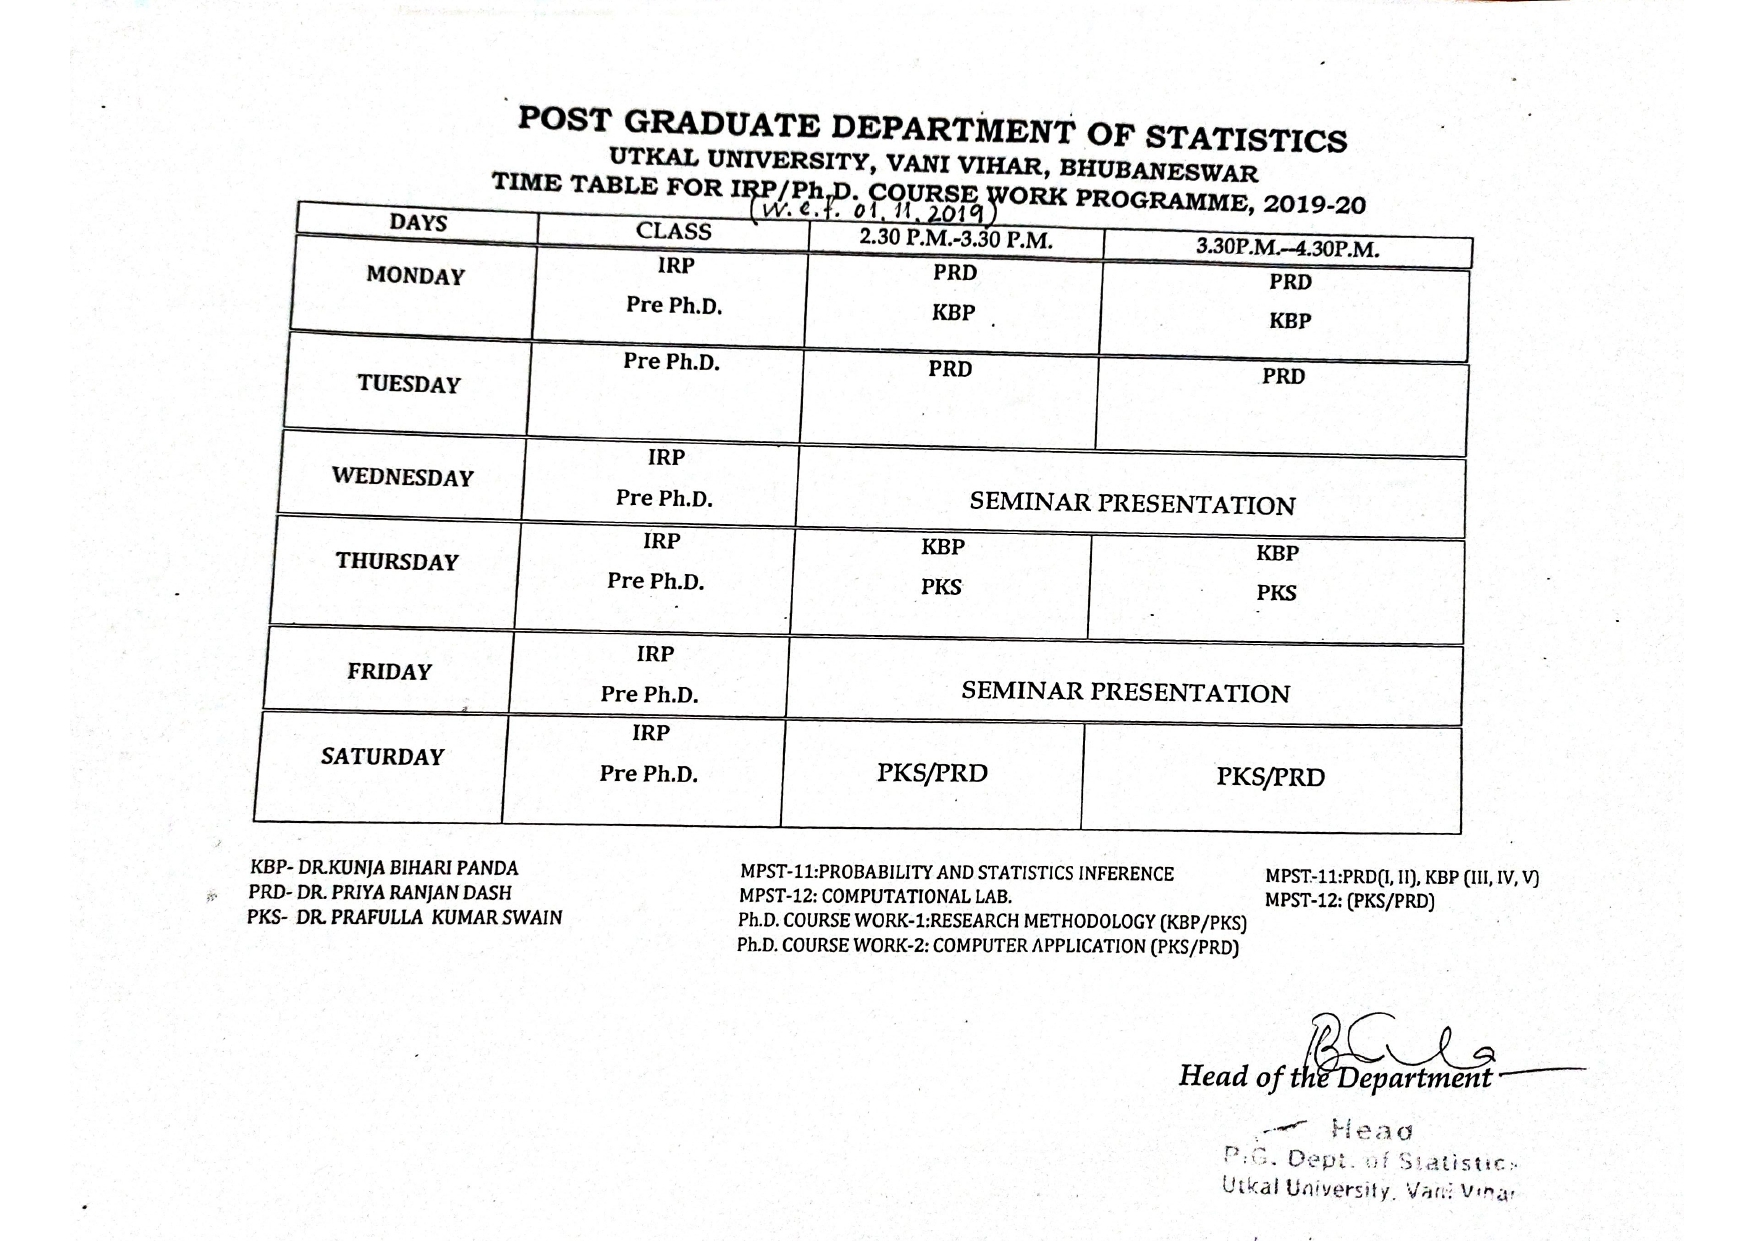 Time Table for IRP Ph.D Coursework 2019-20